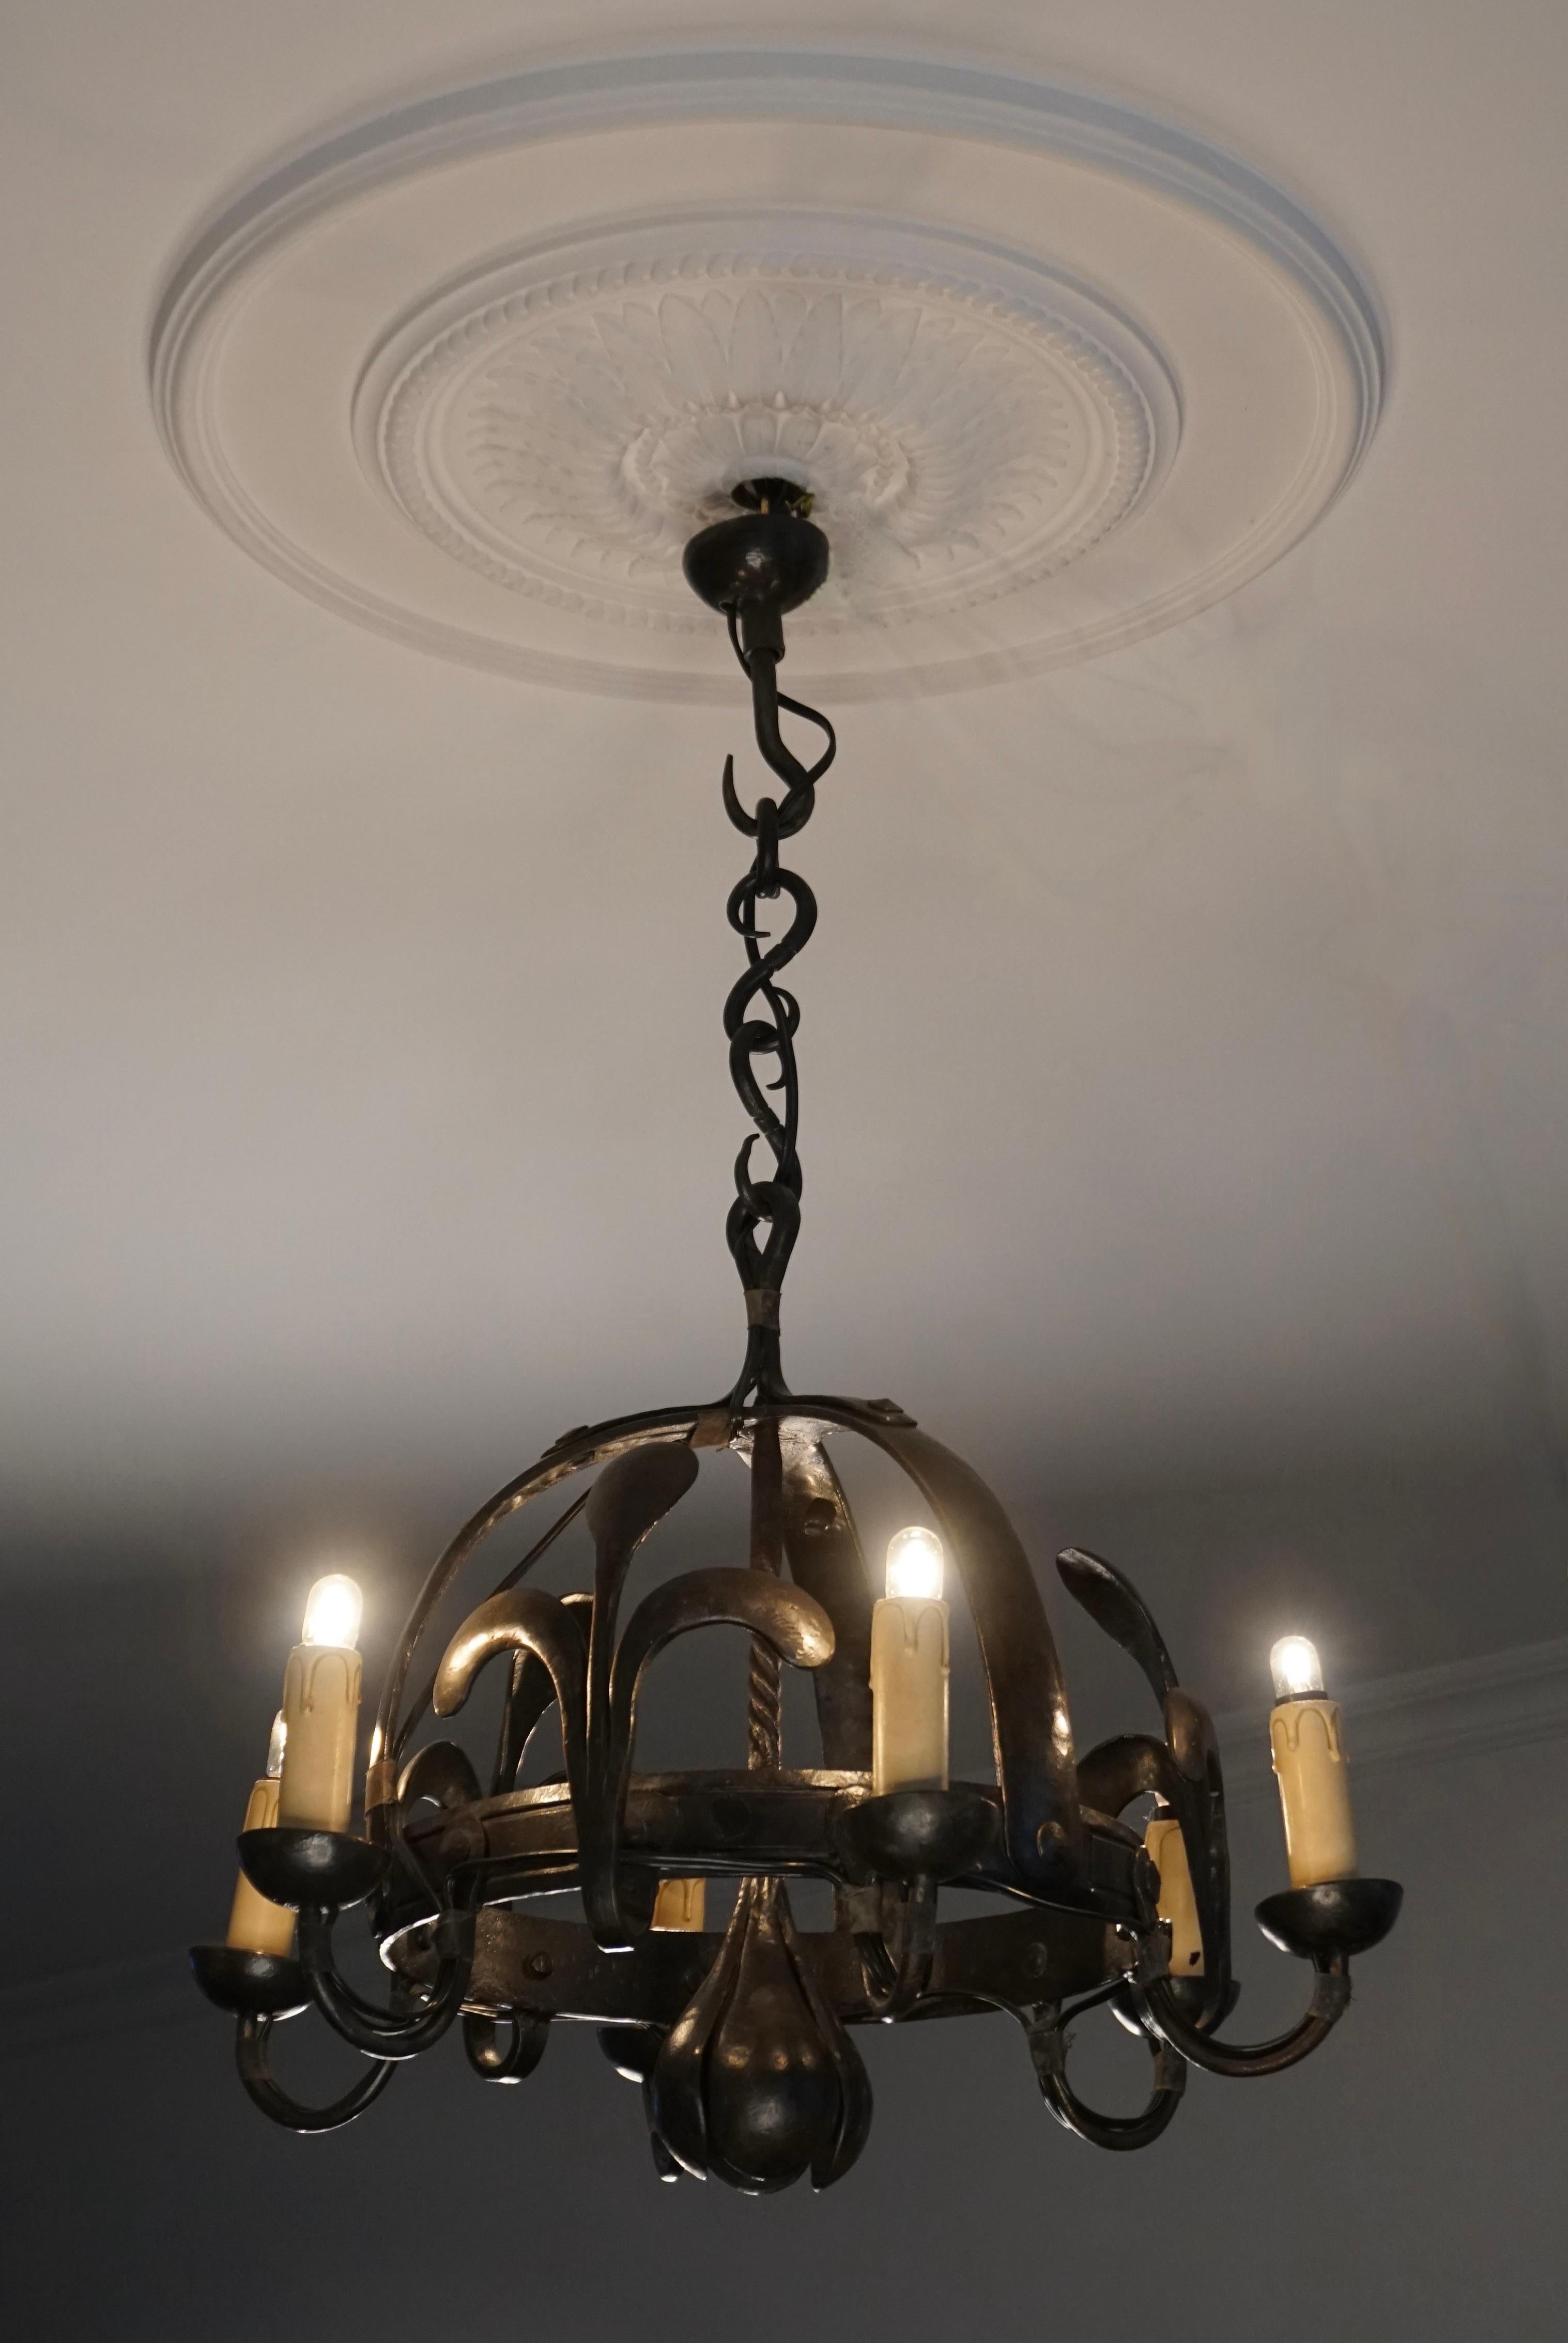 Original antique candle pendant converted to electric chandelier.

This unique and elegant, six-light chandelier incorporates everything that we love about antiques: it is unique, it is all handcrafted, it is of excellent quality workmanship, it is